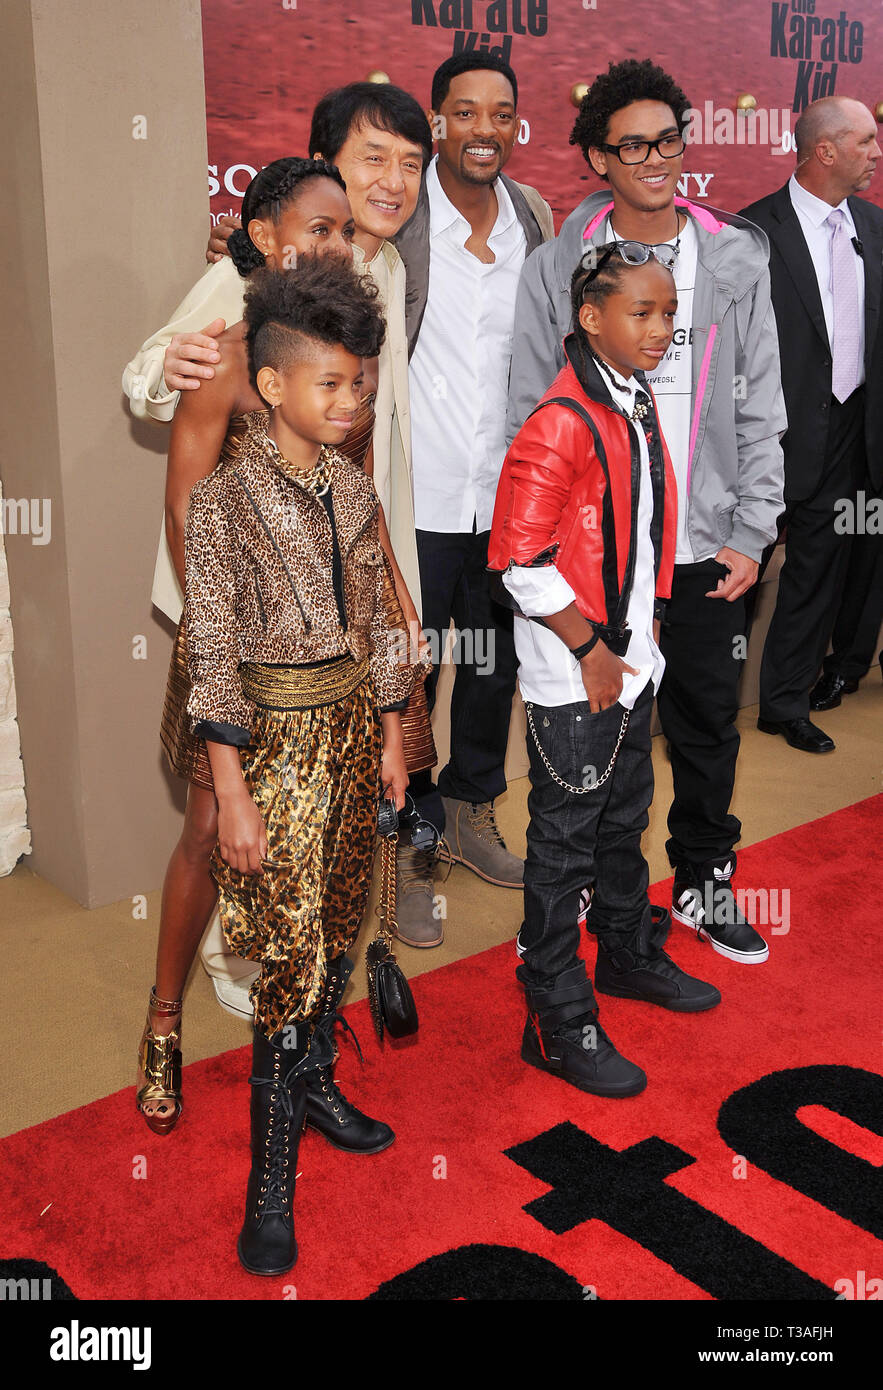 Jackie Chan   Jaden Smith   Will Smith   Jada   Willow  53   - The Karate Kid Premiere at the Westwood Village Theatre In Los Angeles.Jackie Chan   Jaden Smith   Will Smith   Jada   Willow  53  Event in Hollywood Life - California, Red Carpet Event, USA, Film Industry, Celebrities, Photography, Bestof, Arts Culture and Entertainment, Topix Celebrities fashion, Best of, Hollywood Life, Event in Hollywood Life - California, Red Carpet and backstage, movie celebrities, TV celebrities, Music celebrities, Topix, actors from the same movie, cast and co star together.  inquiry tsuni@Gamma-USA.com, Cr Stock Photo